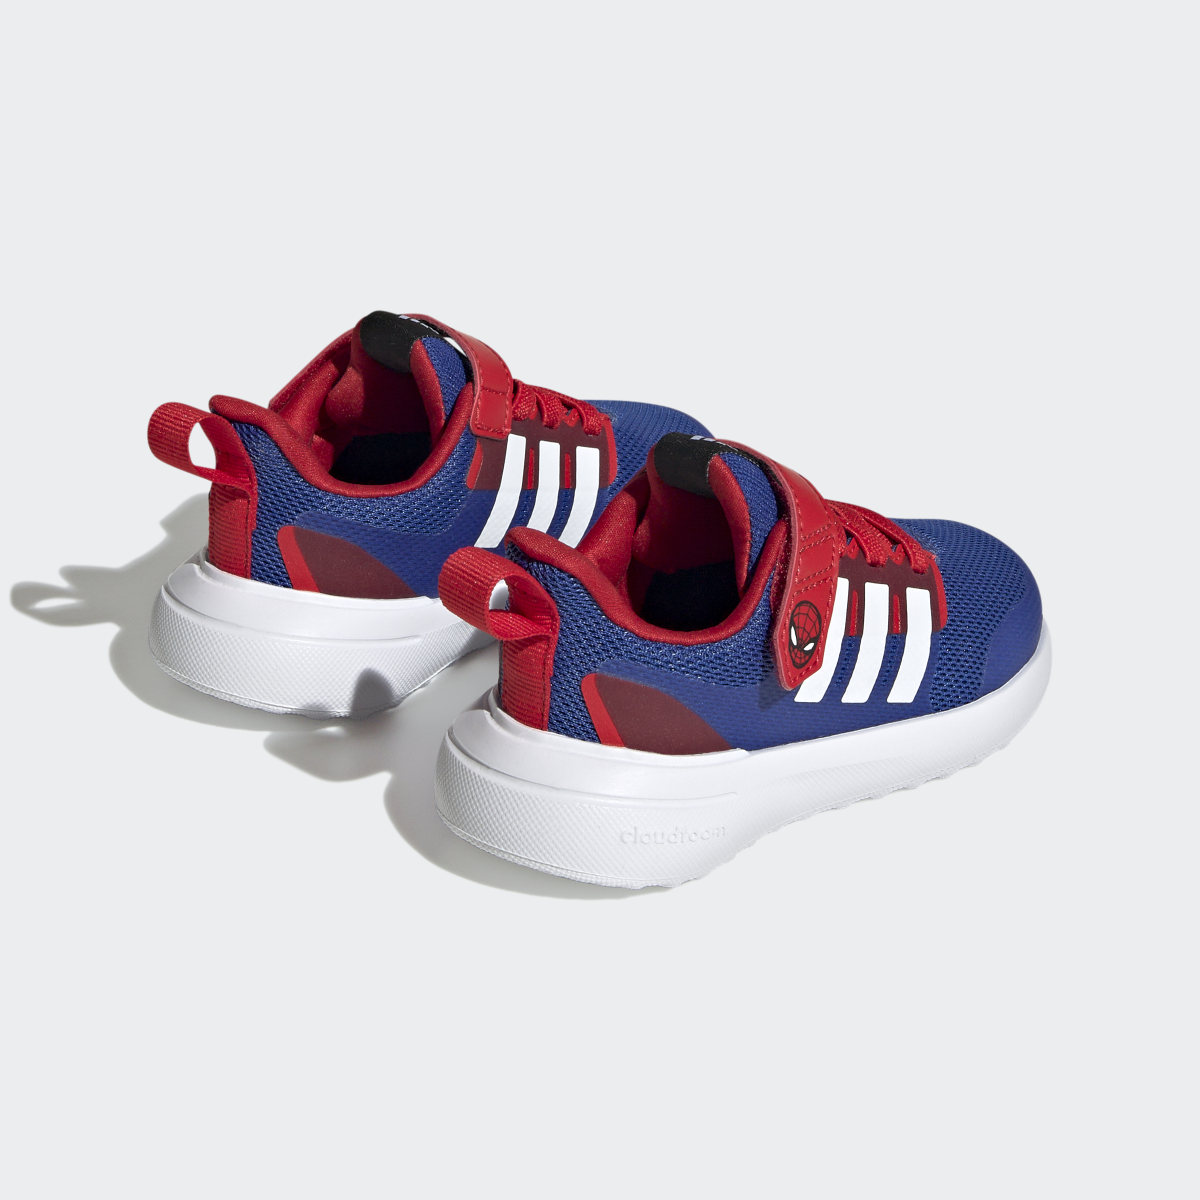 Adidas x Marvel FortaRun 2.0 Spider-Man Cloudfoam Elastic Lace Top Strap Shoes. 6